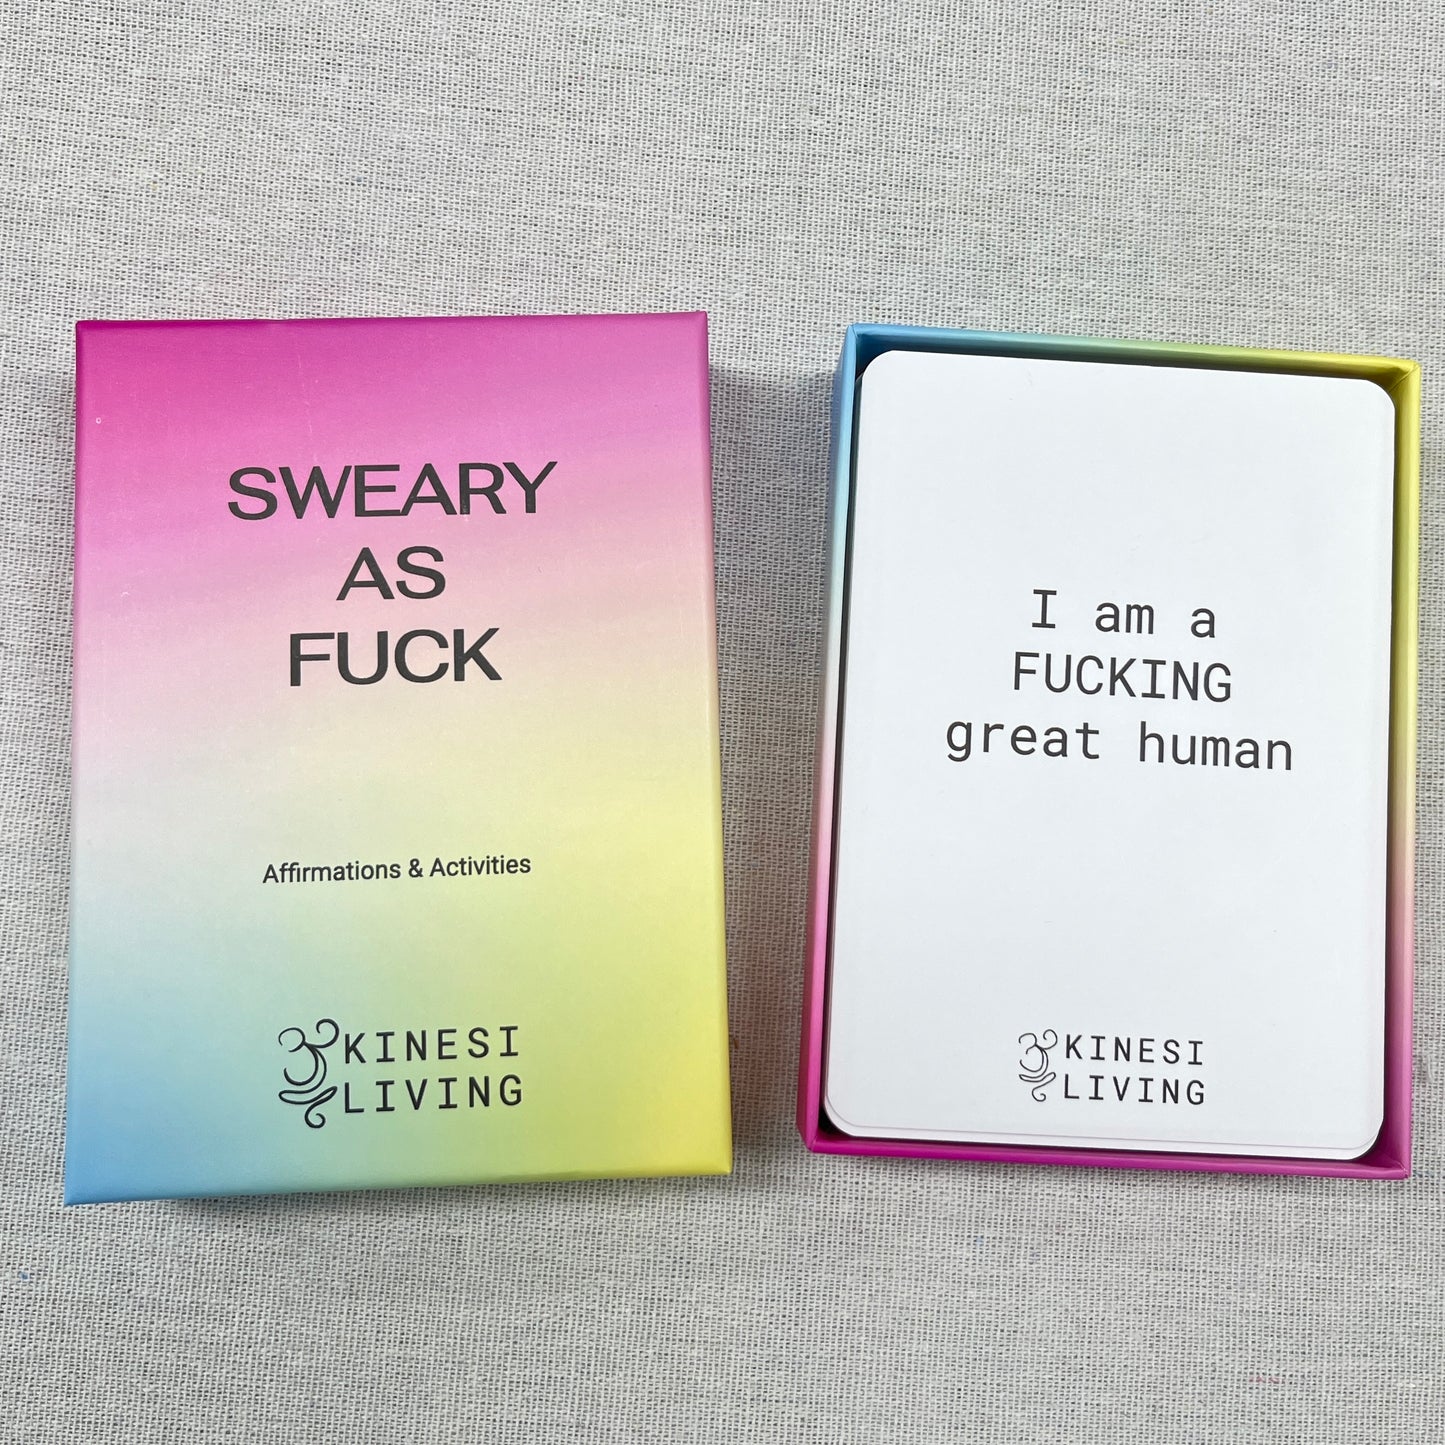 Sweary as Fuck Affirmations & Activities